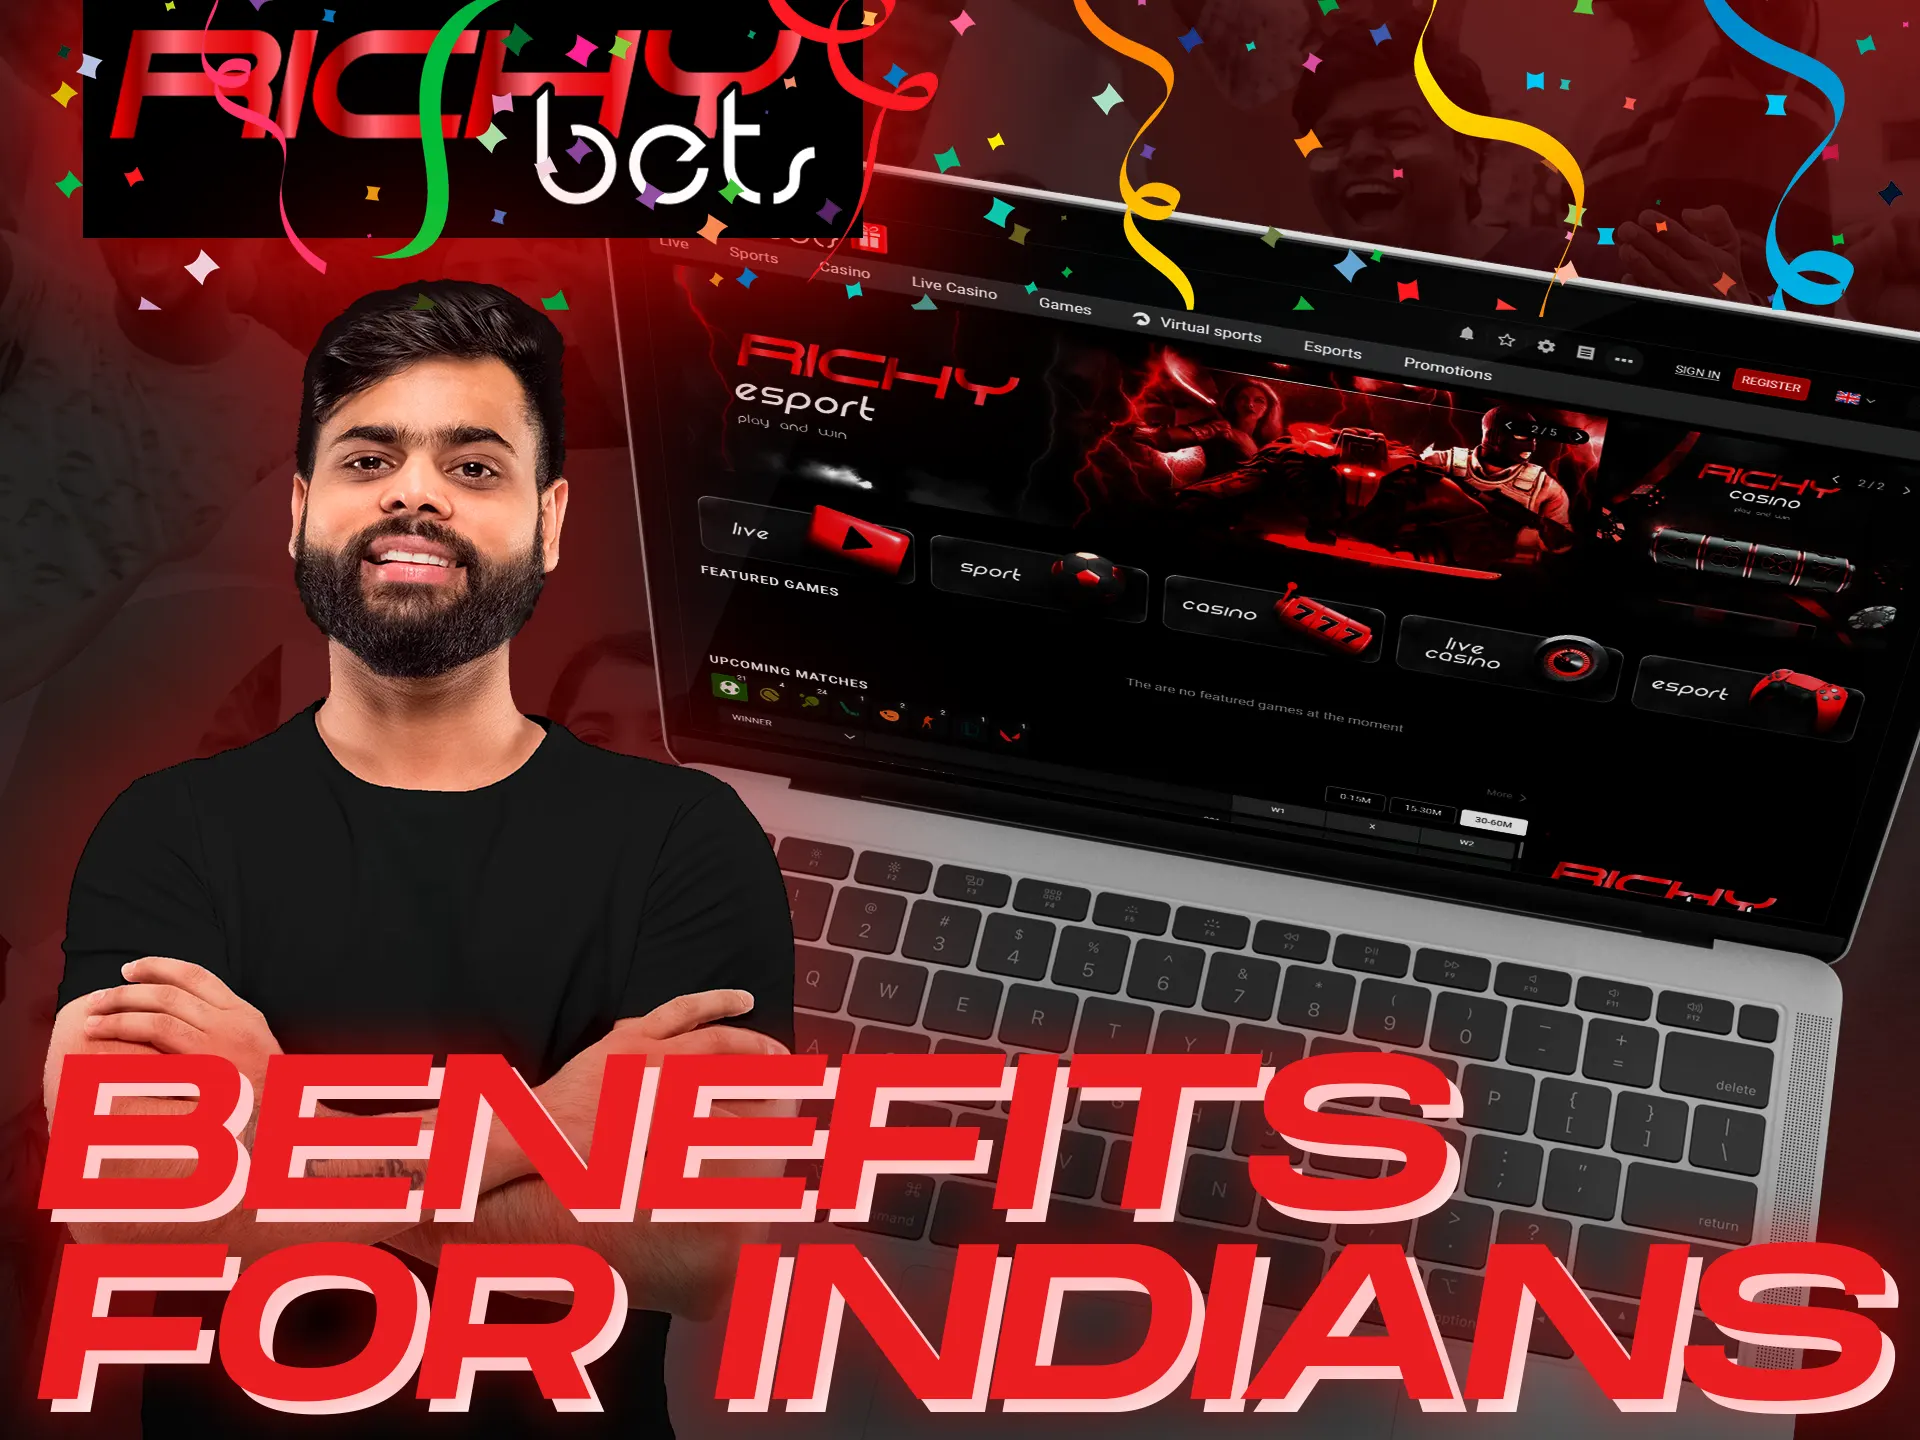 Get an additional bonus if you bet from India.